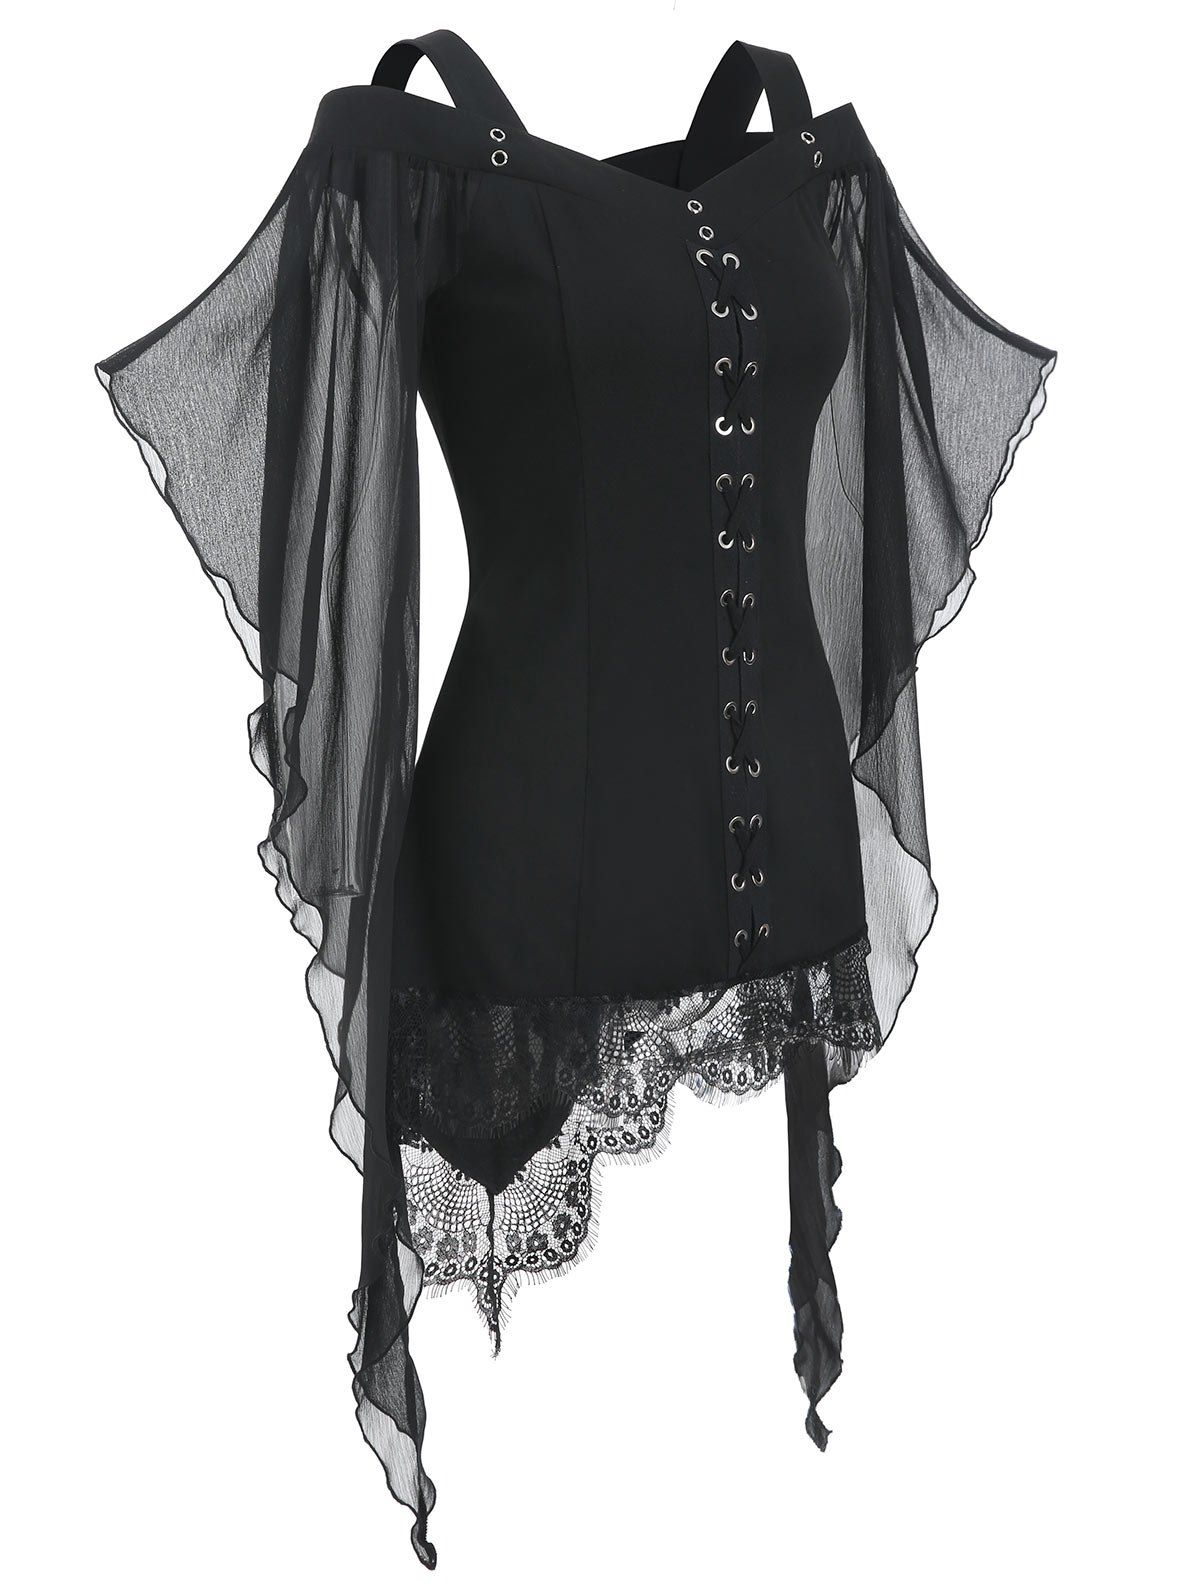 Gothic Criss Cross Lace Insert Butterfly Sleeve T-shirt - BLACK M